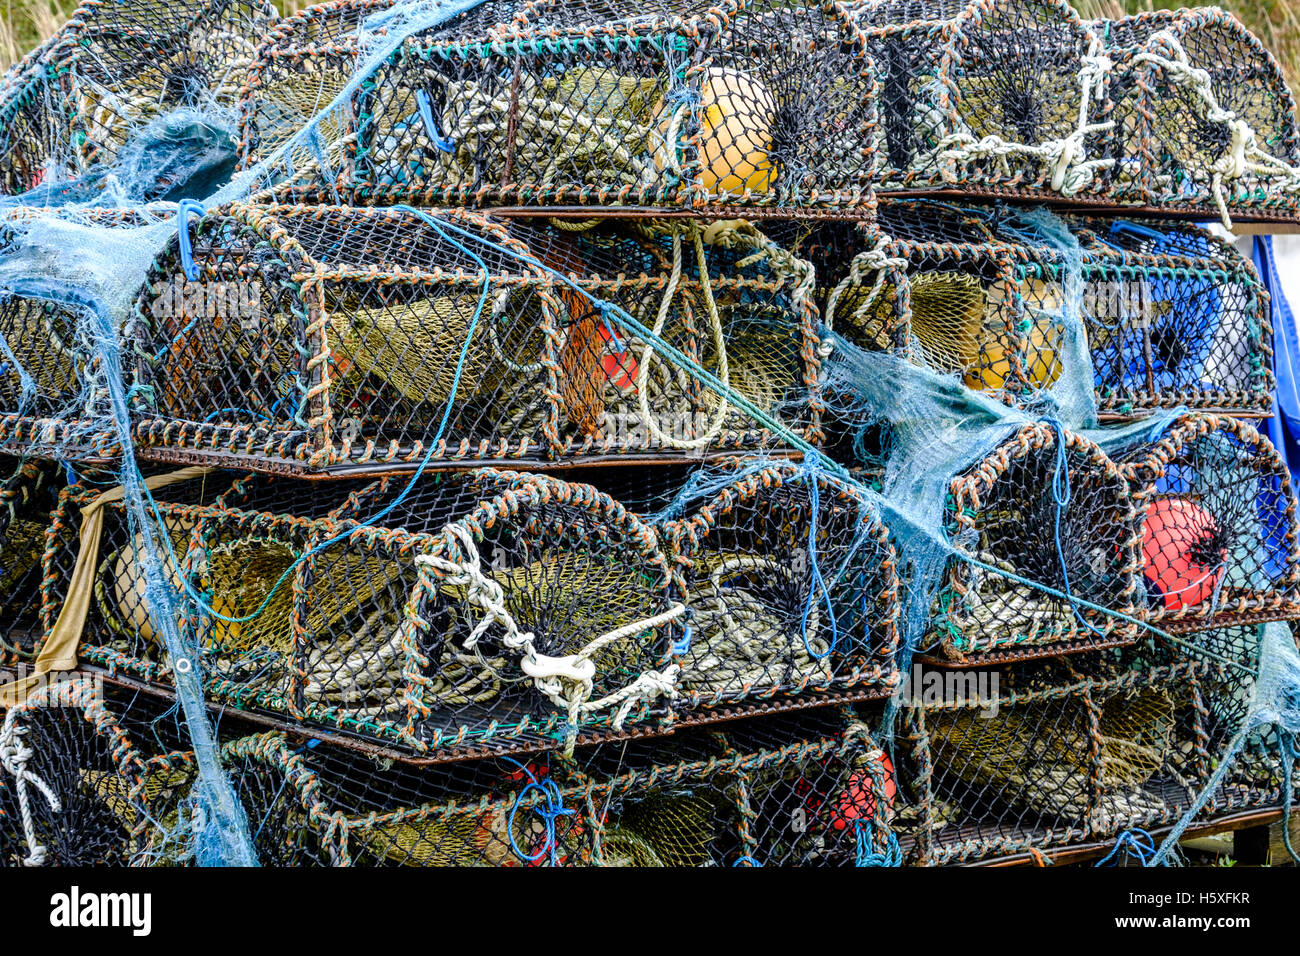 Stack of lobster pot creels on the Isle of Skye Scotland with